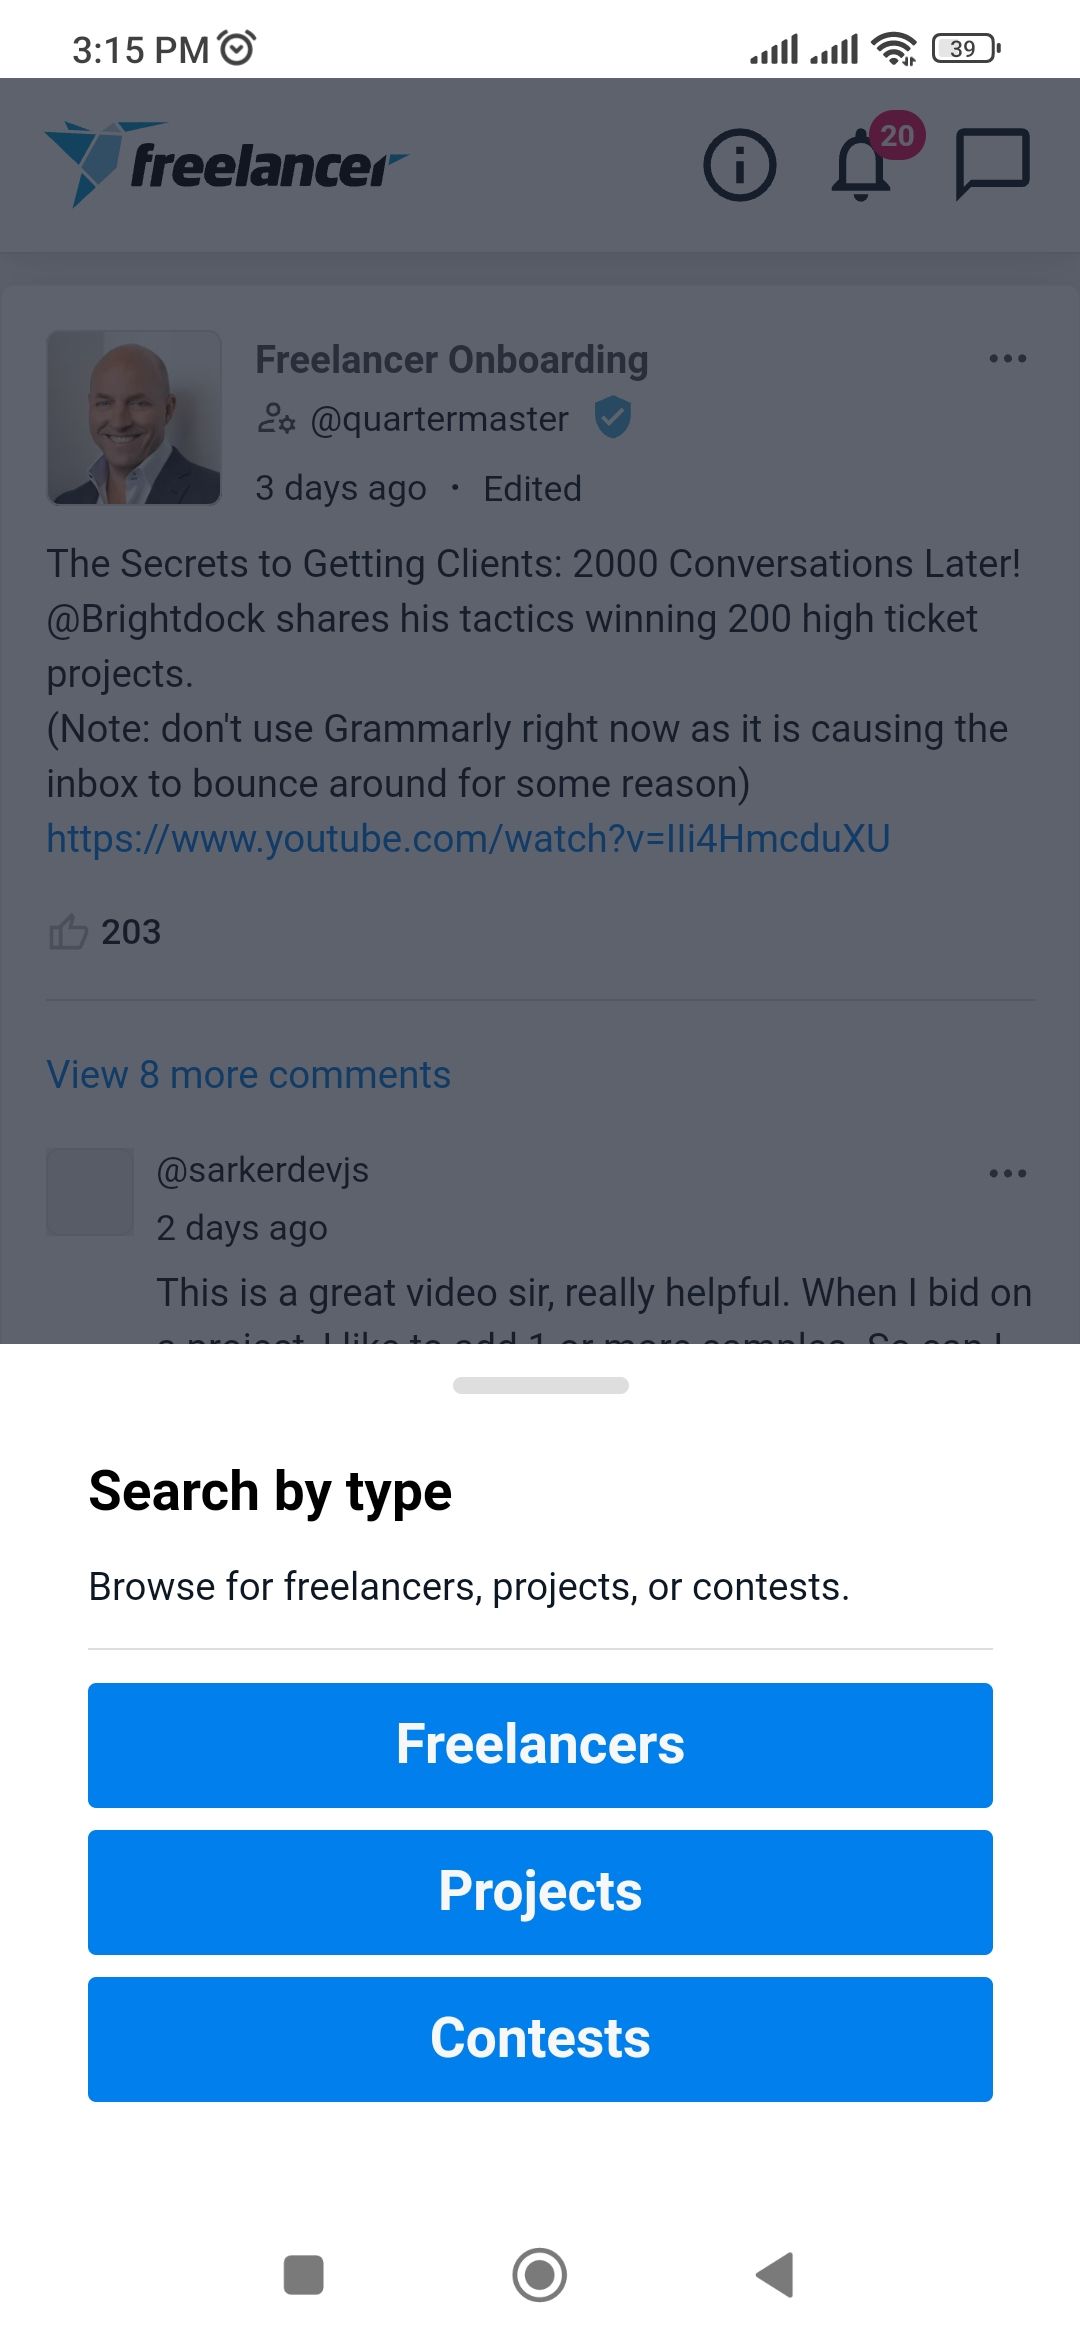 Search by type options in the Freelancer app